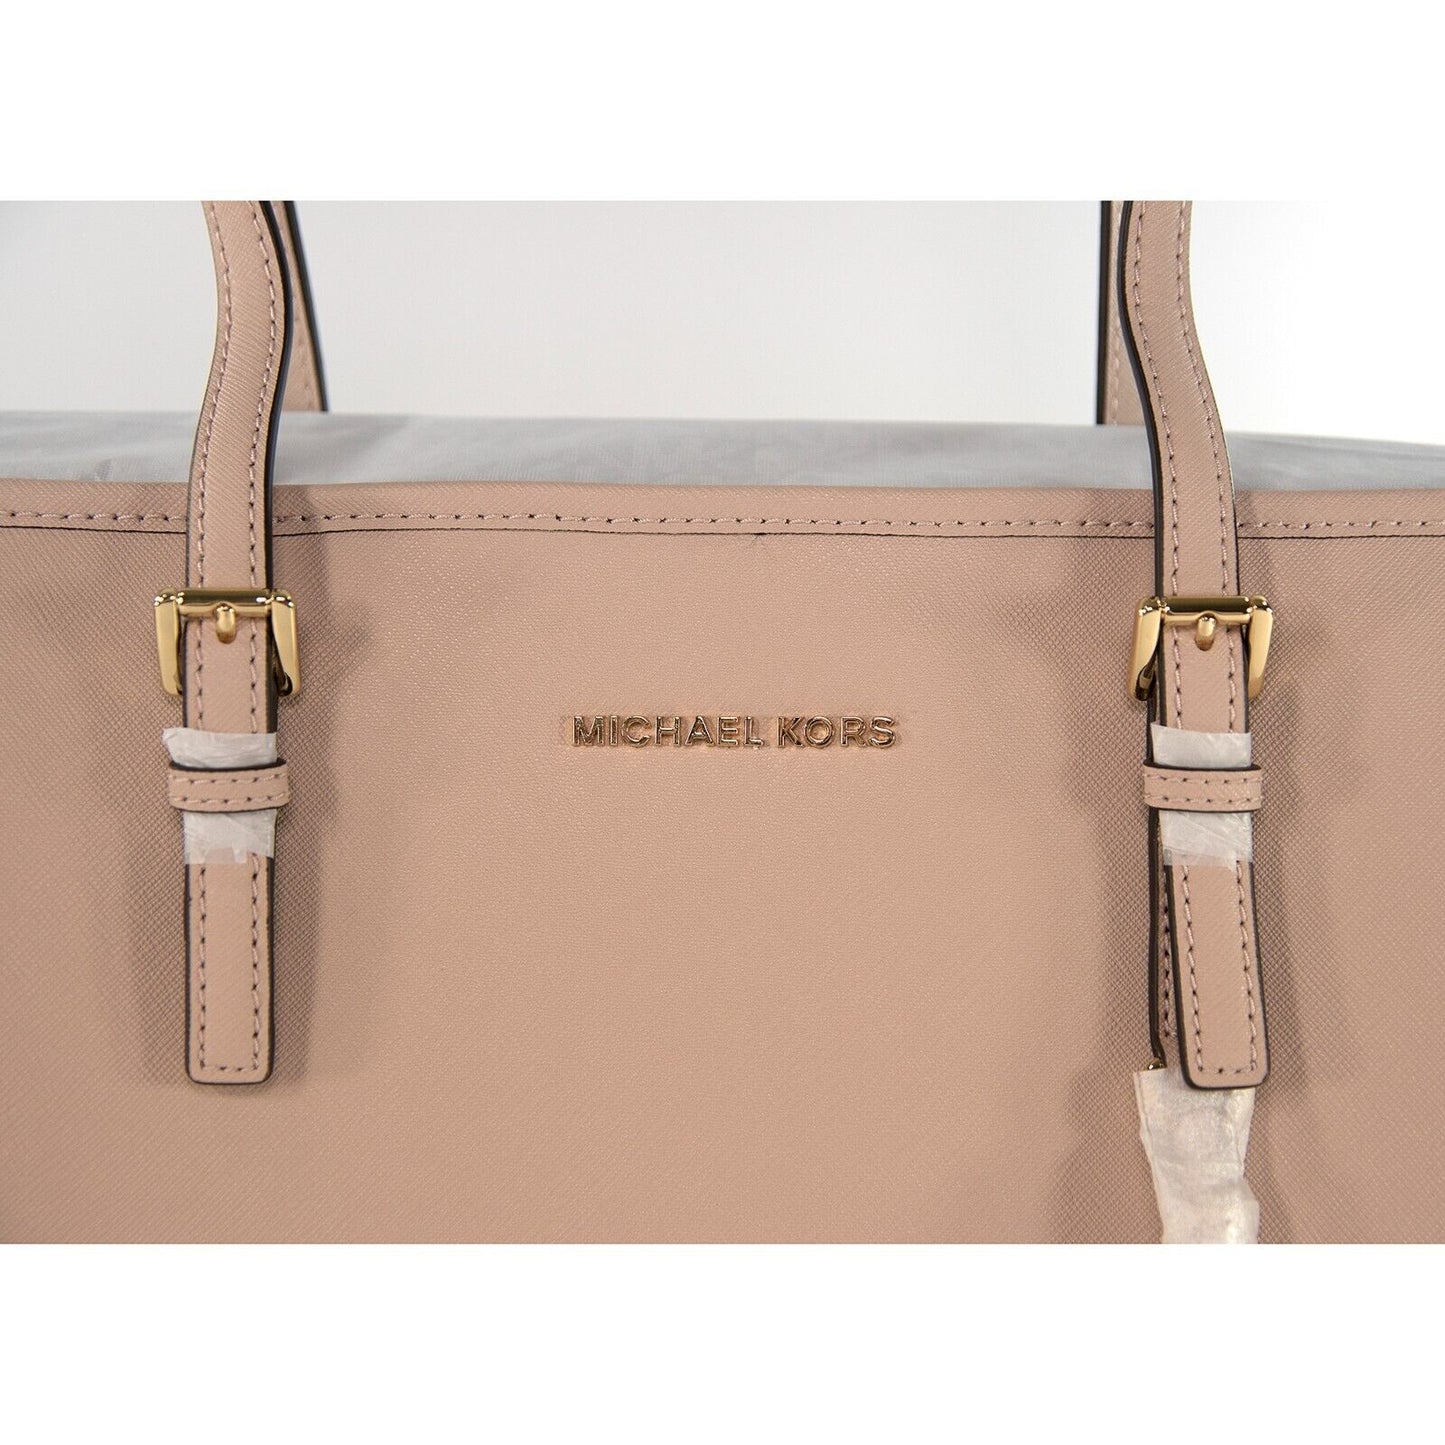 Michael Kors Soft Pink Saffiano Leather Multifunction Travel Tote Bag NWT